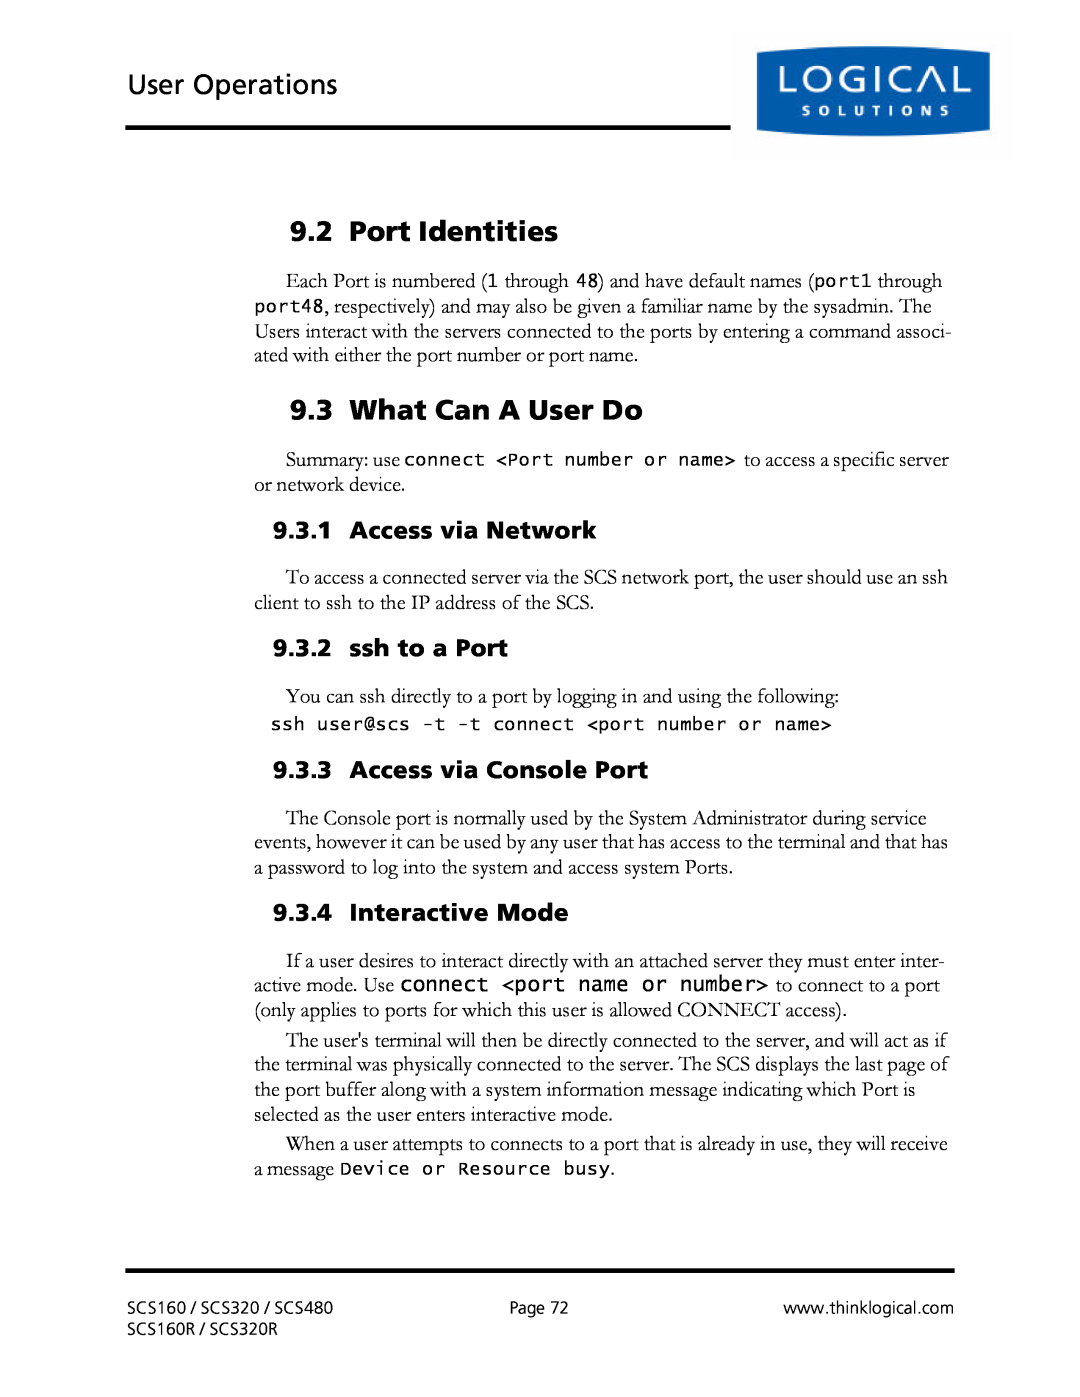 Logical Solutions SCS-R manual User Operations, Port Identities, What Can A User Do, Access via Network, ssh to a Port 